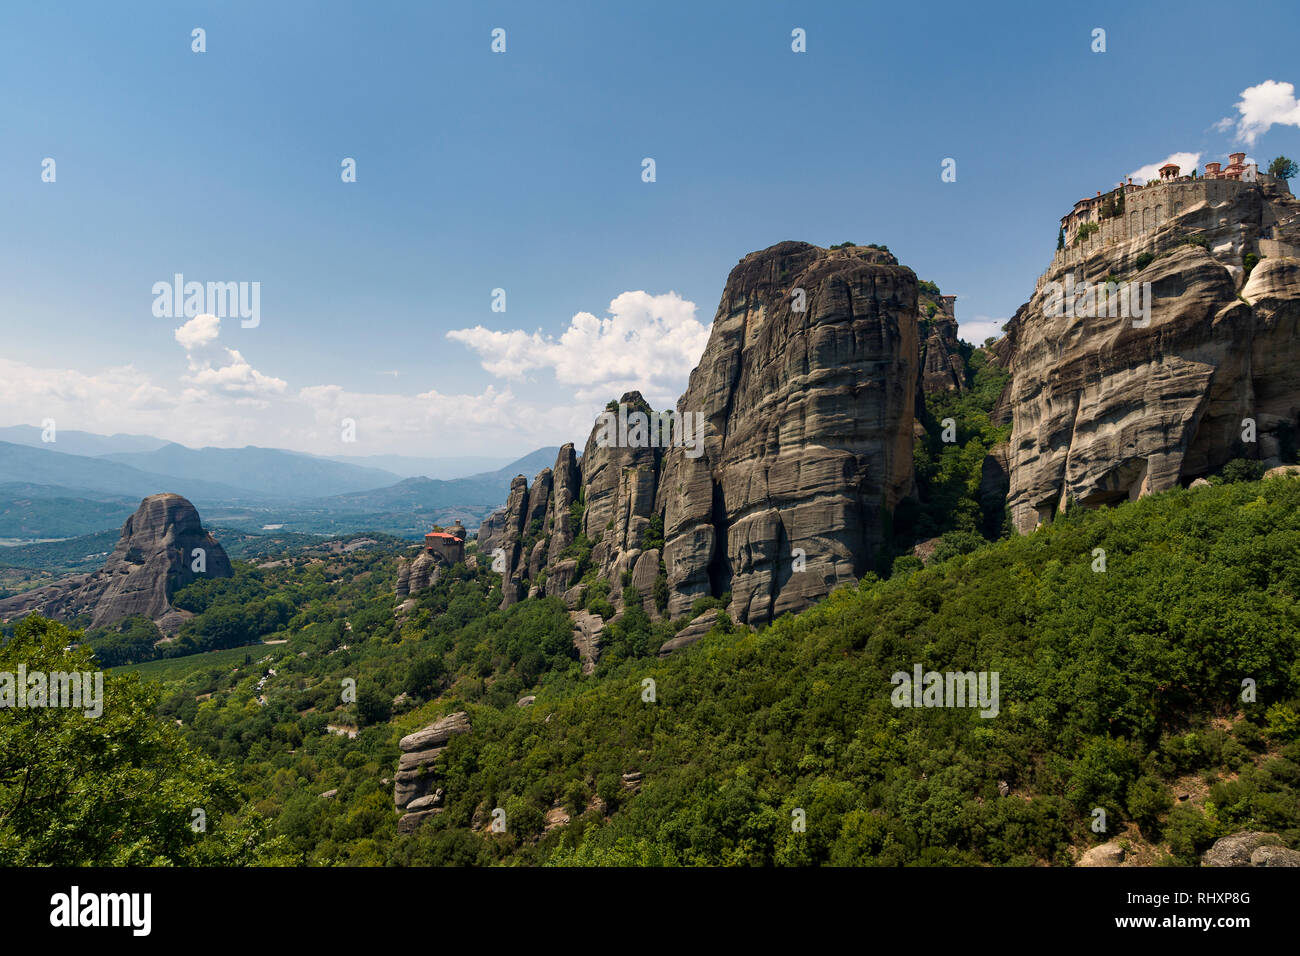 Meteora are rock formations hosting complexes of Orthodox Christian Monasteries,built on immense natural pillars & hill-like rounded boulders. Stock Photo